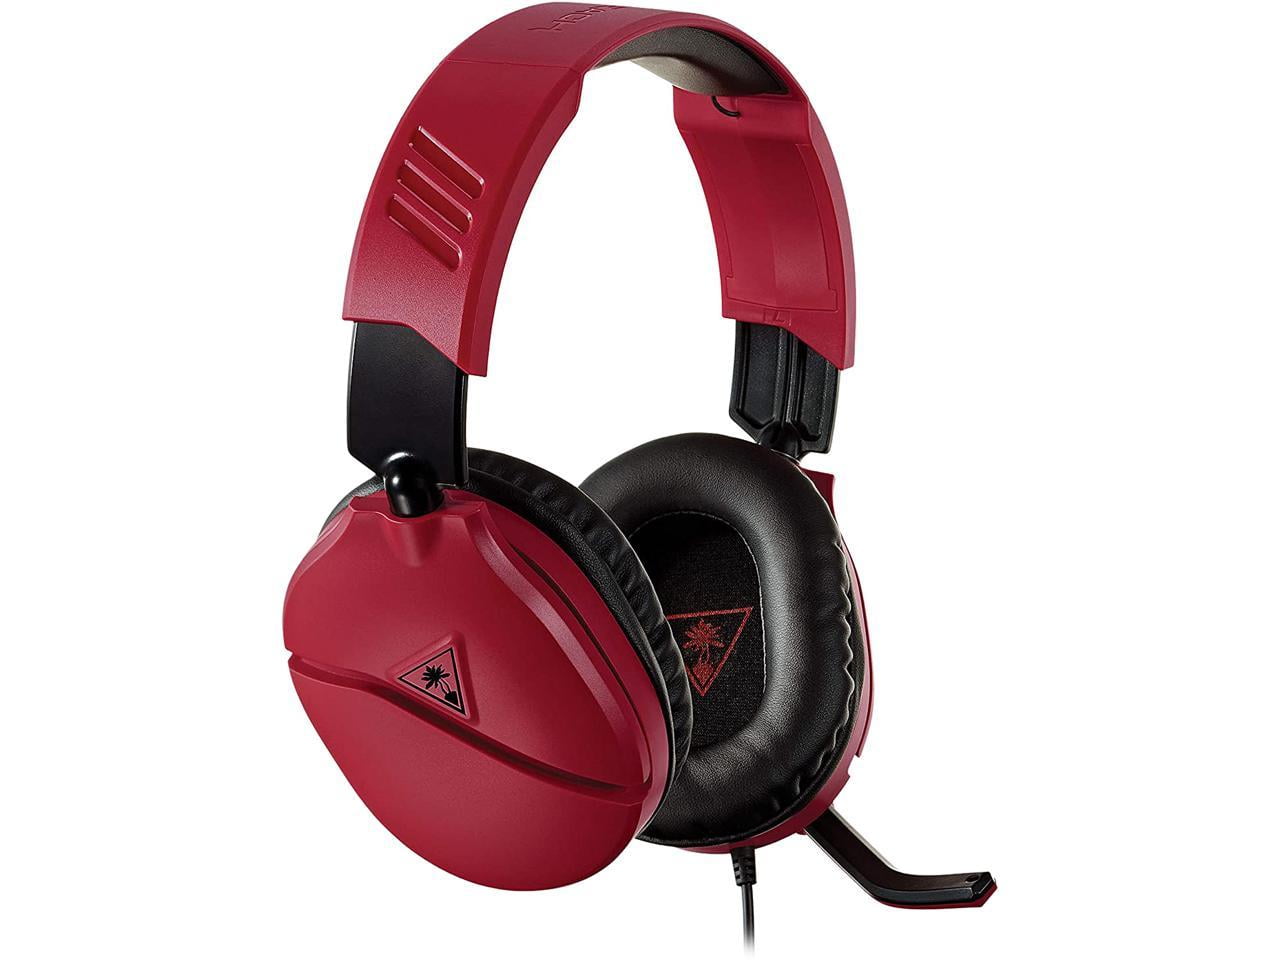 Turtle Beach Recon 70 Xbox Gaming Headset for Xbox Series X, Xbox Series S, Xbox One, PlayStation, Nintendo Switch, Mobile, & PC with 3.5mm - Flip-to-Mute Mic, 40mm Speakers - Midnight Red - Walmart.com